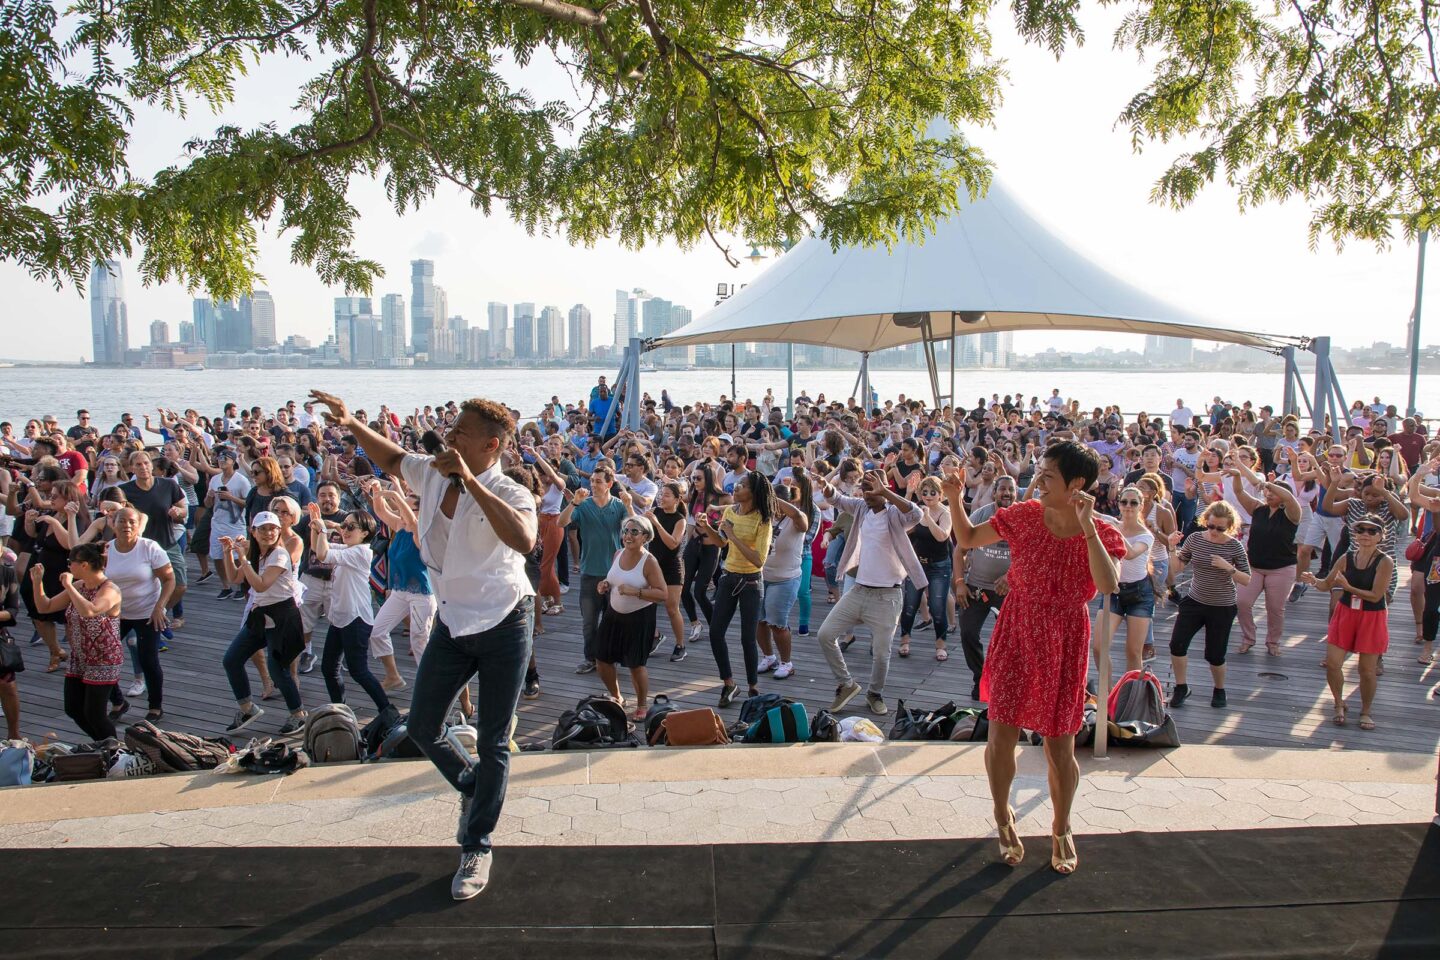 Talia teaches a group of Park visitors how to salsa at Pier 45